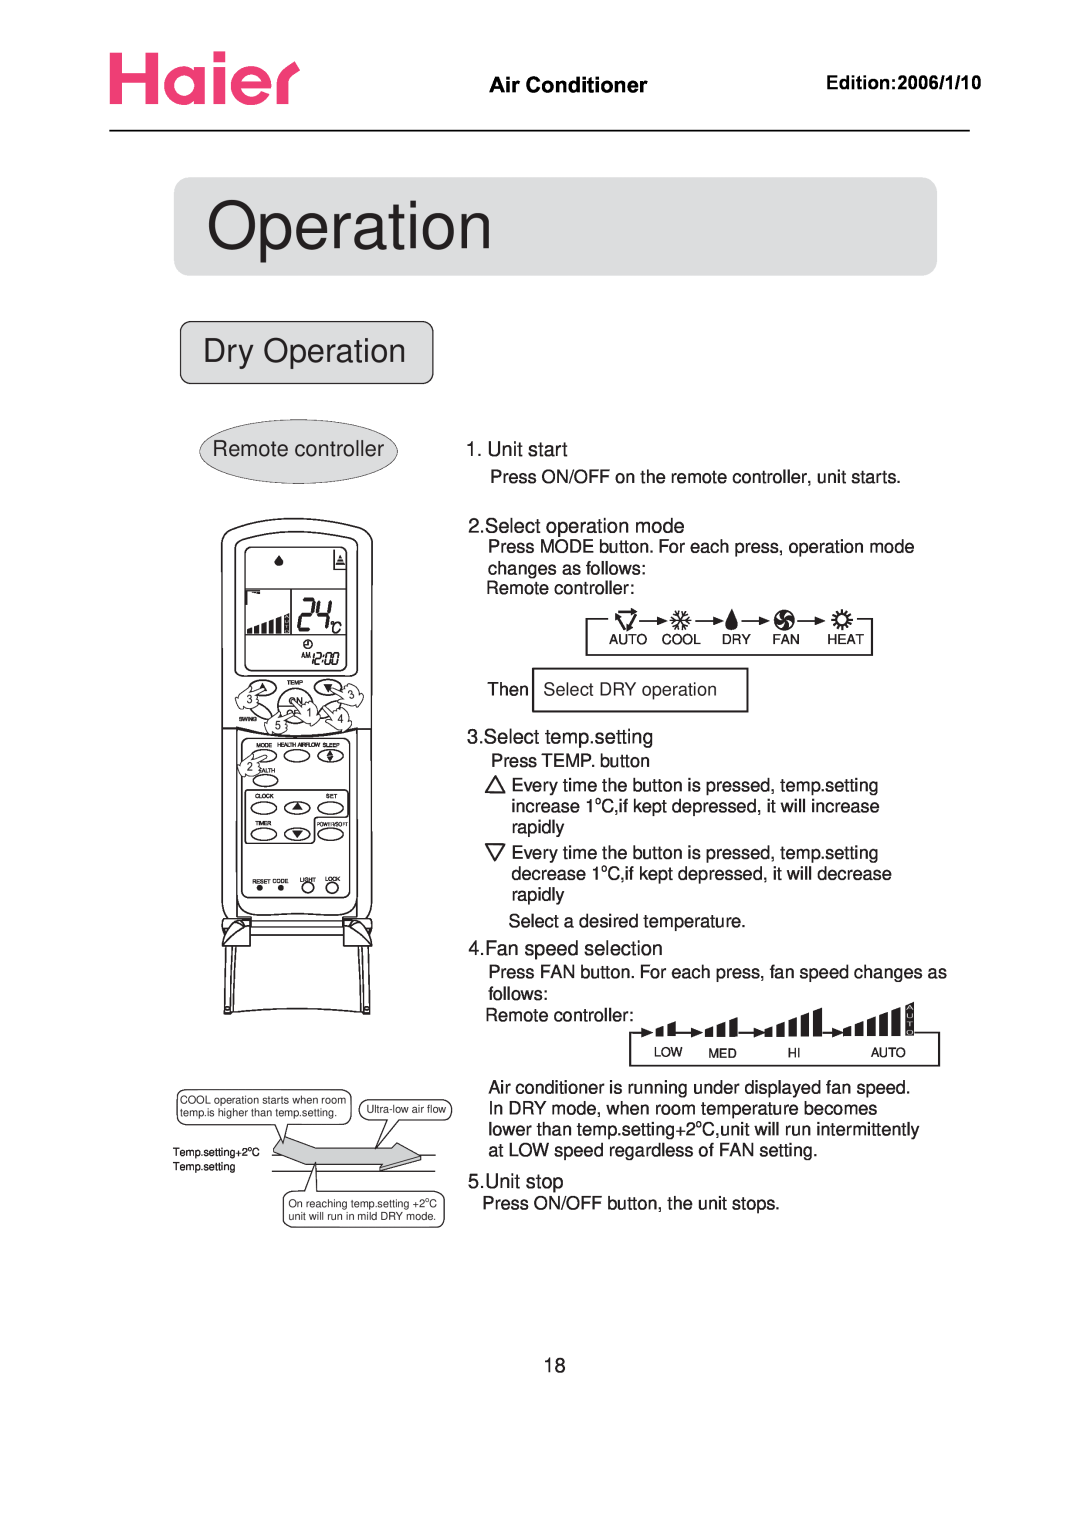 Haier Compact Air Conditioner manual Dry Operation, Remote controller, Air Conditioner      , Edition 2006/1/10 